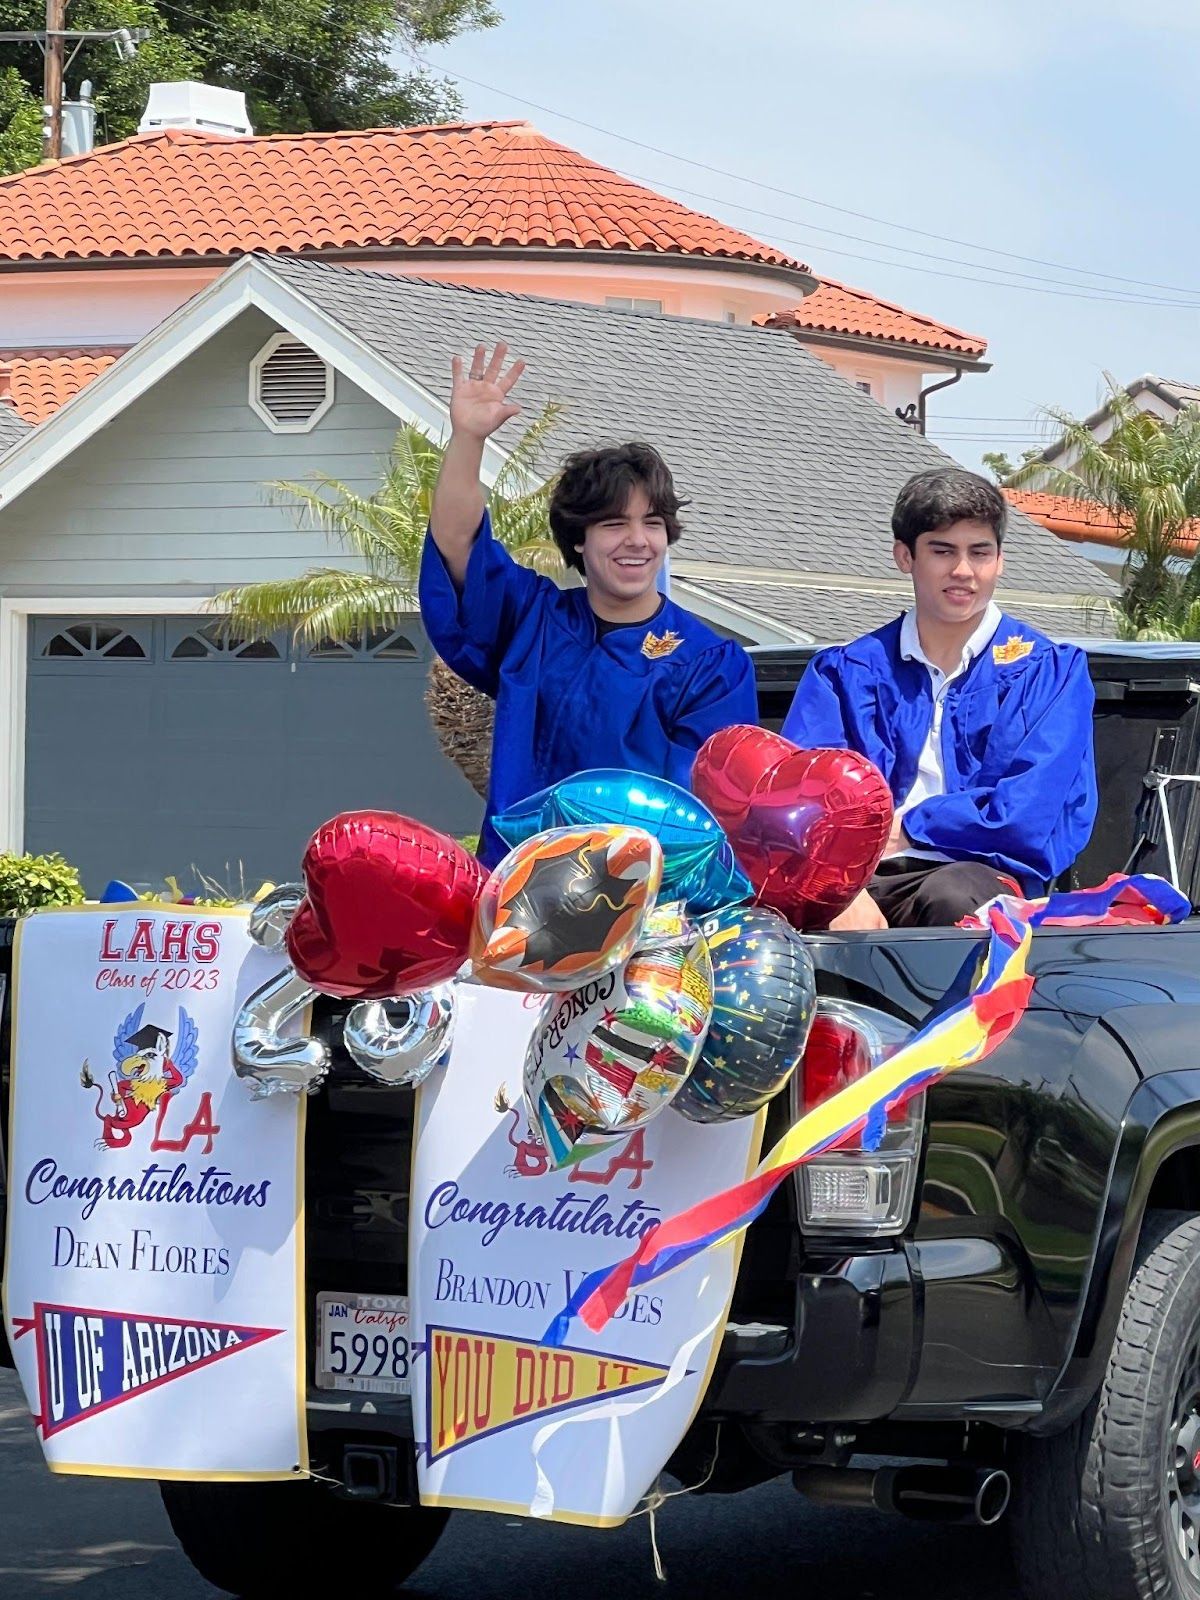 Seniors in the class of 2023 from Los Alamitos High School take part in the fourth annual Graduation Celebration Parade in Rossmoor on June 3, 2023. Photo by Nichole Pichardo, Chief Communications Officer for the Los Alamitos USD.